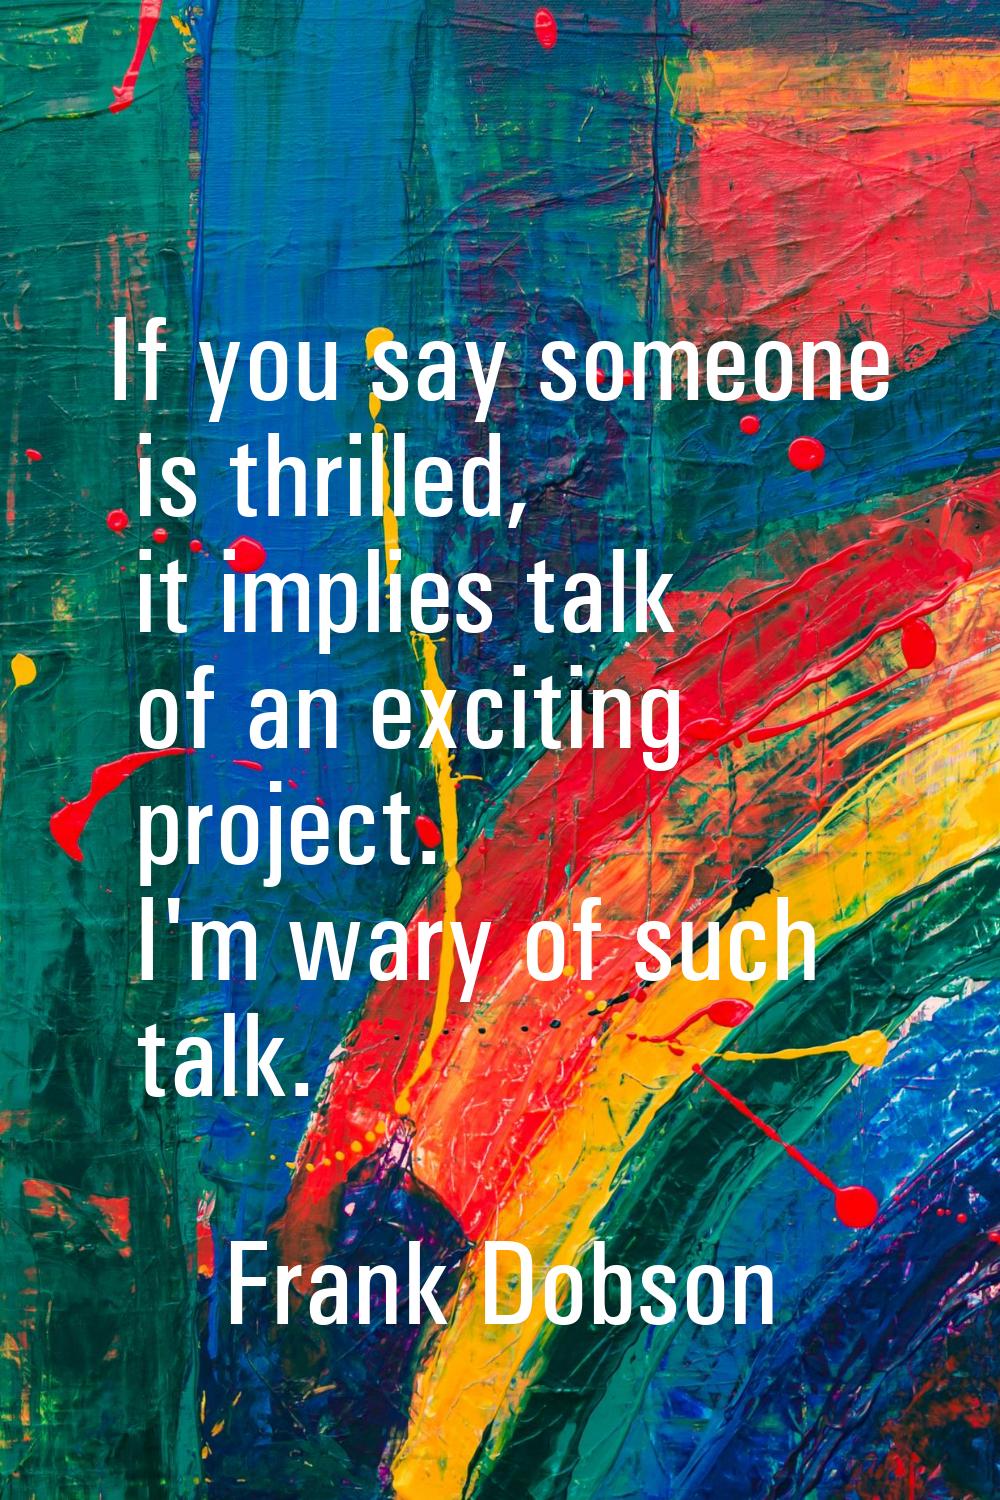 If you say someone is thrilled, it implies talk of an exciting project. I'm wary of such talk.